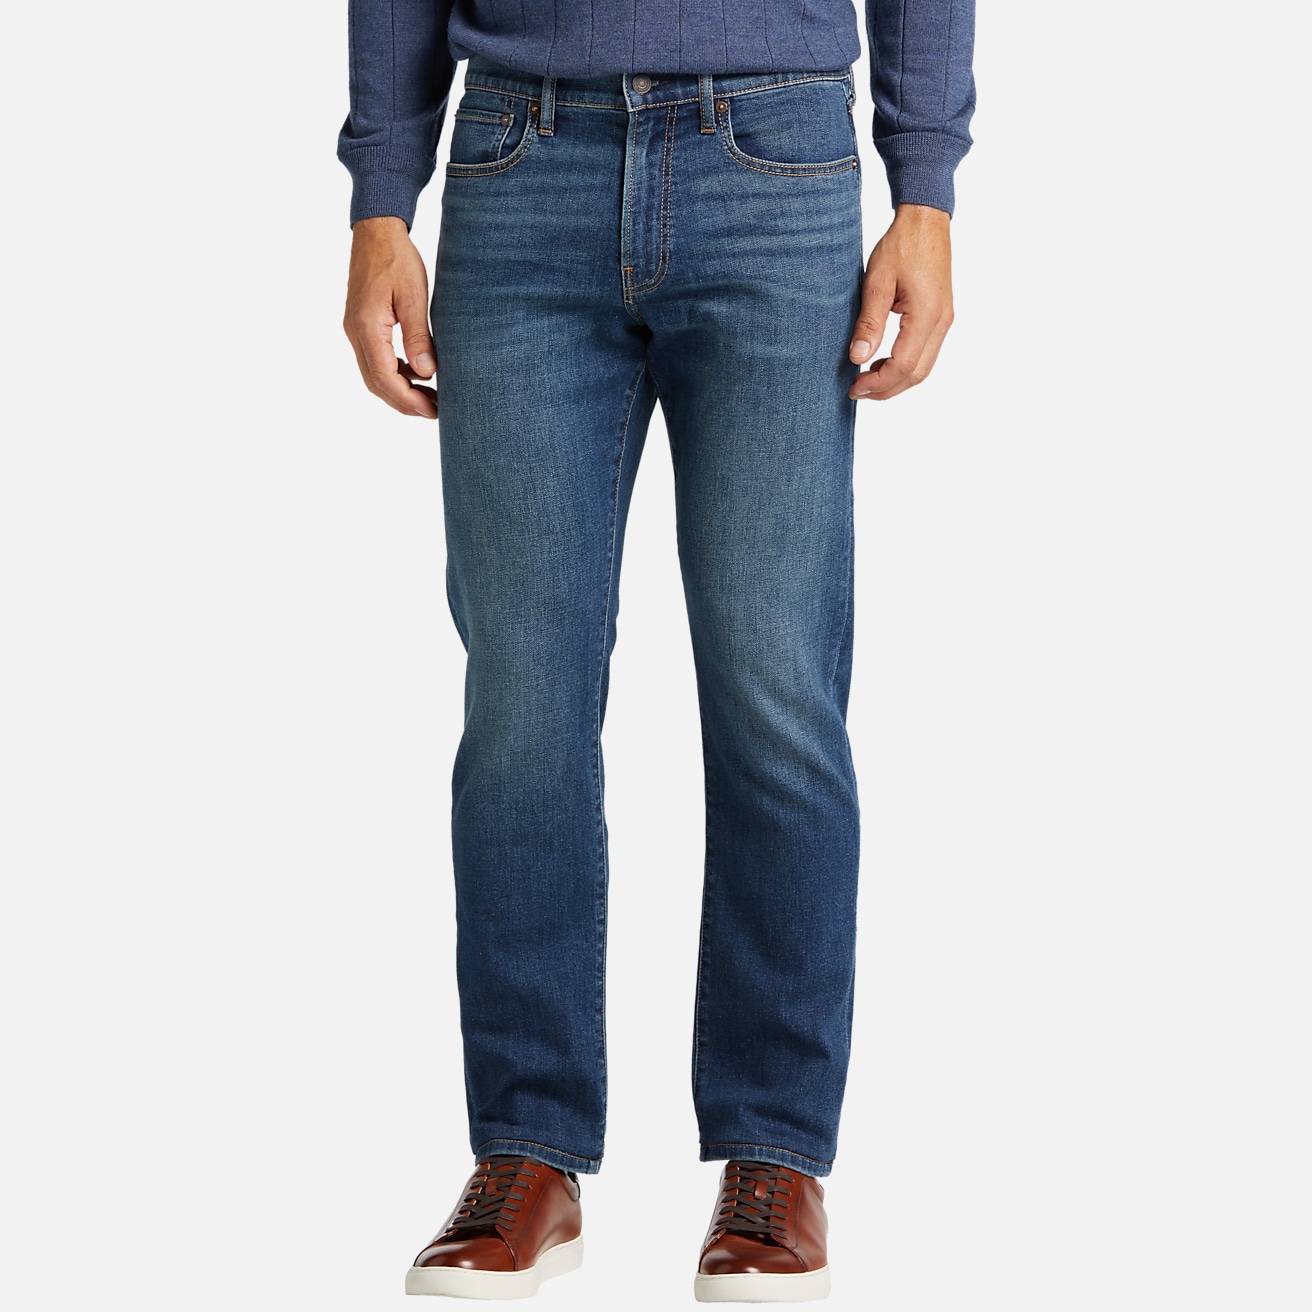 https://image.menswearhouse.com/is/image/TMW/TMW_22ZA_51_LUCKY_BRAND_JEANS_MEDIUM_WASH_MAIN?imPolicy=pdp-mob-2x